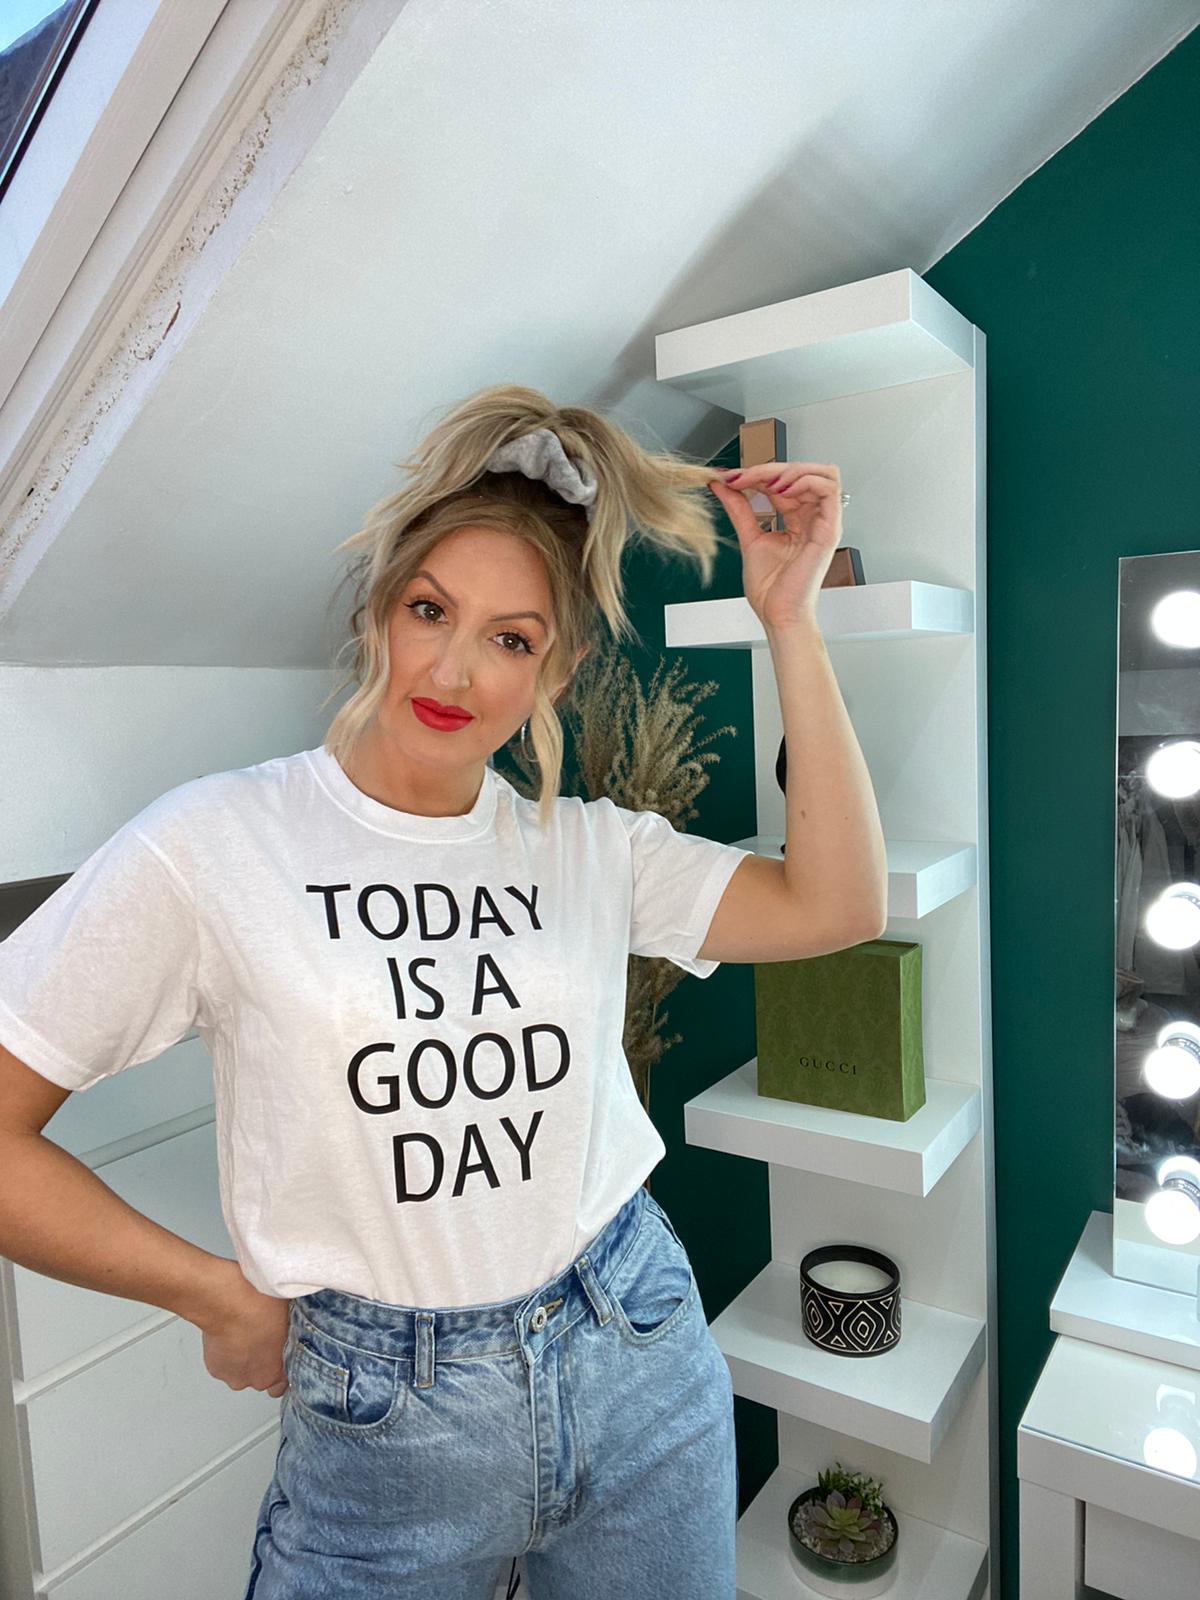 Today Is A Good Day White Slogan Tshirt